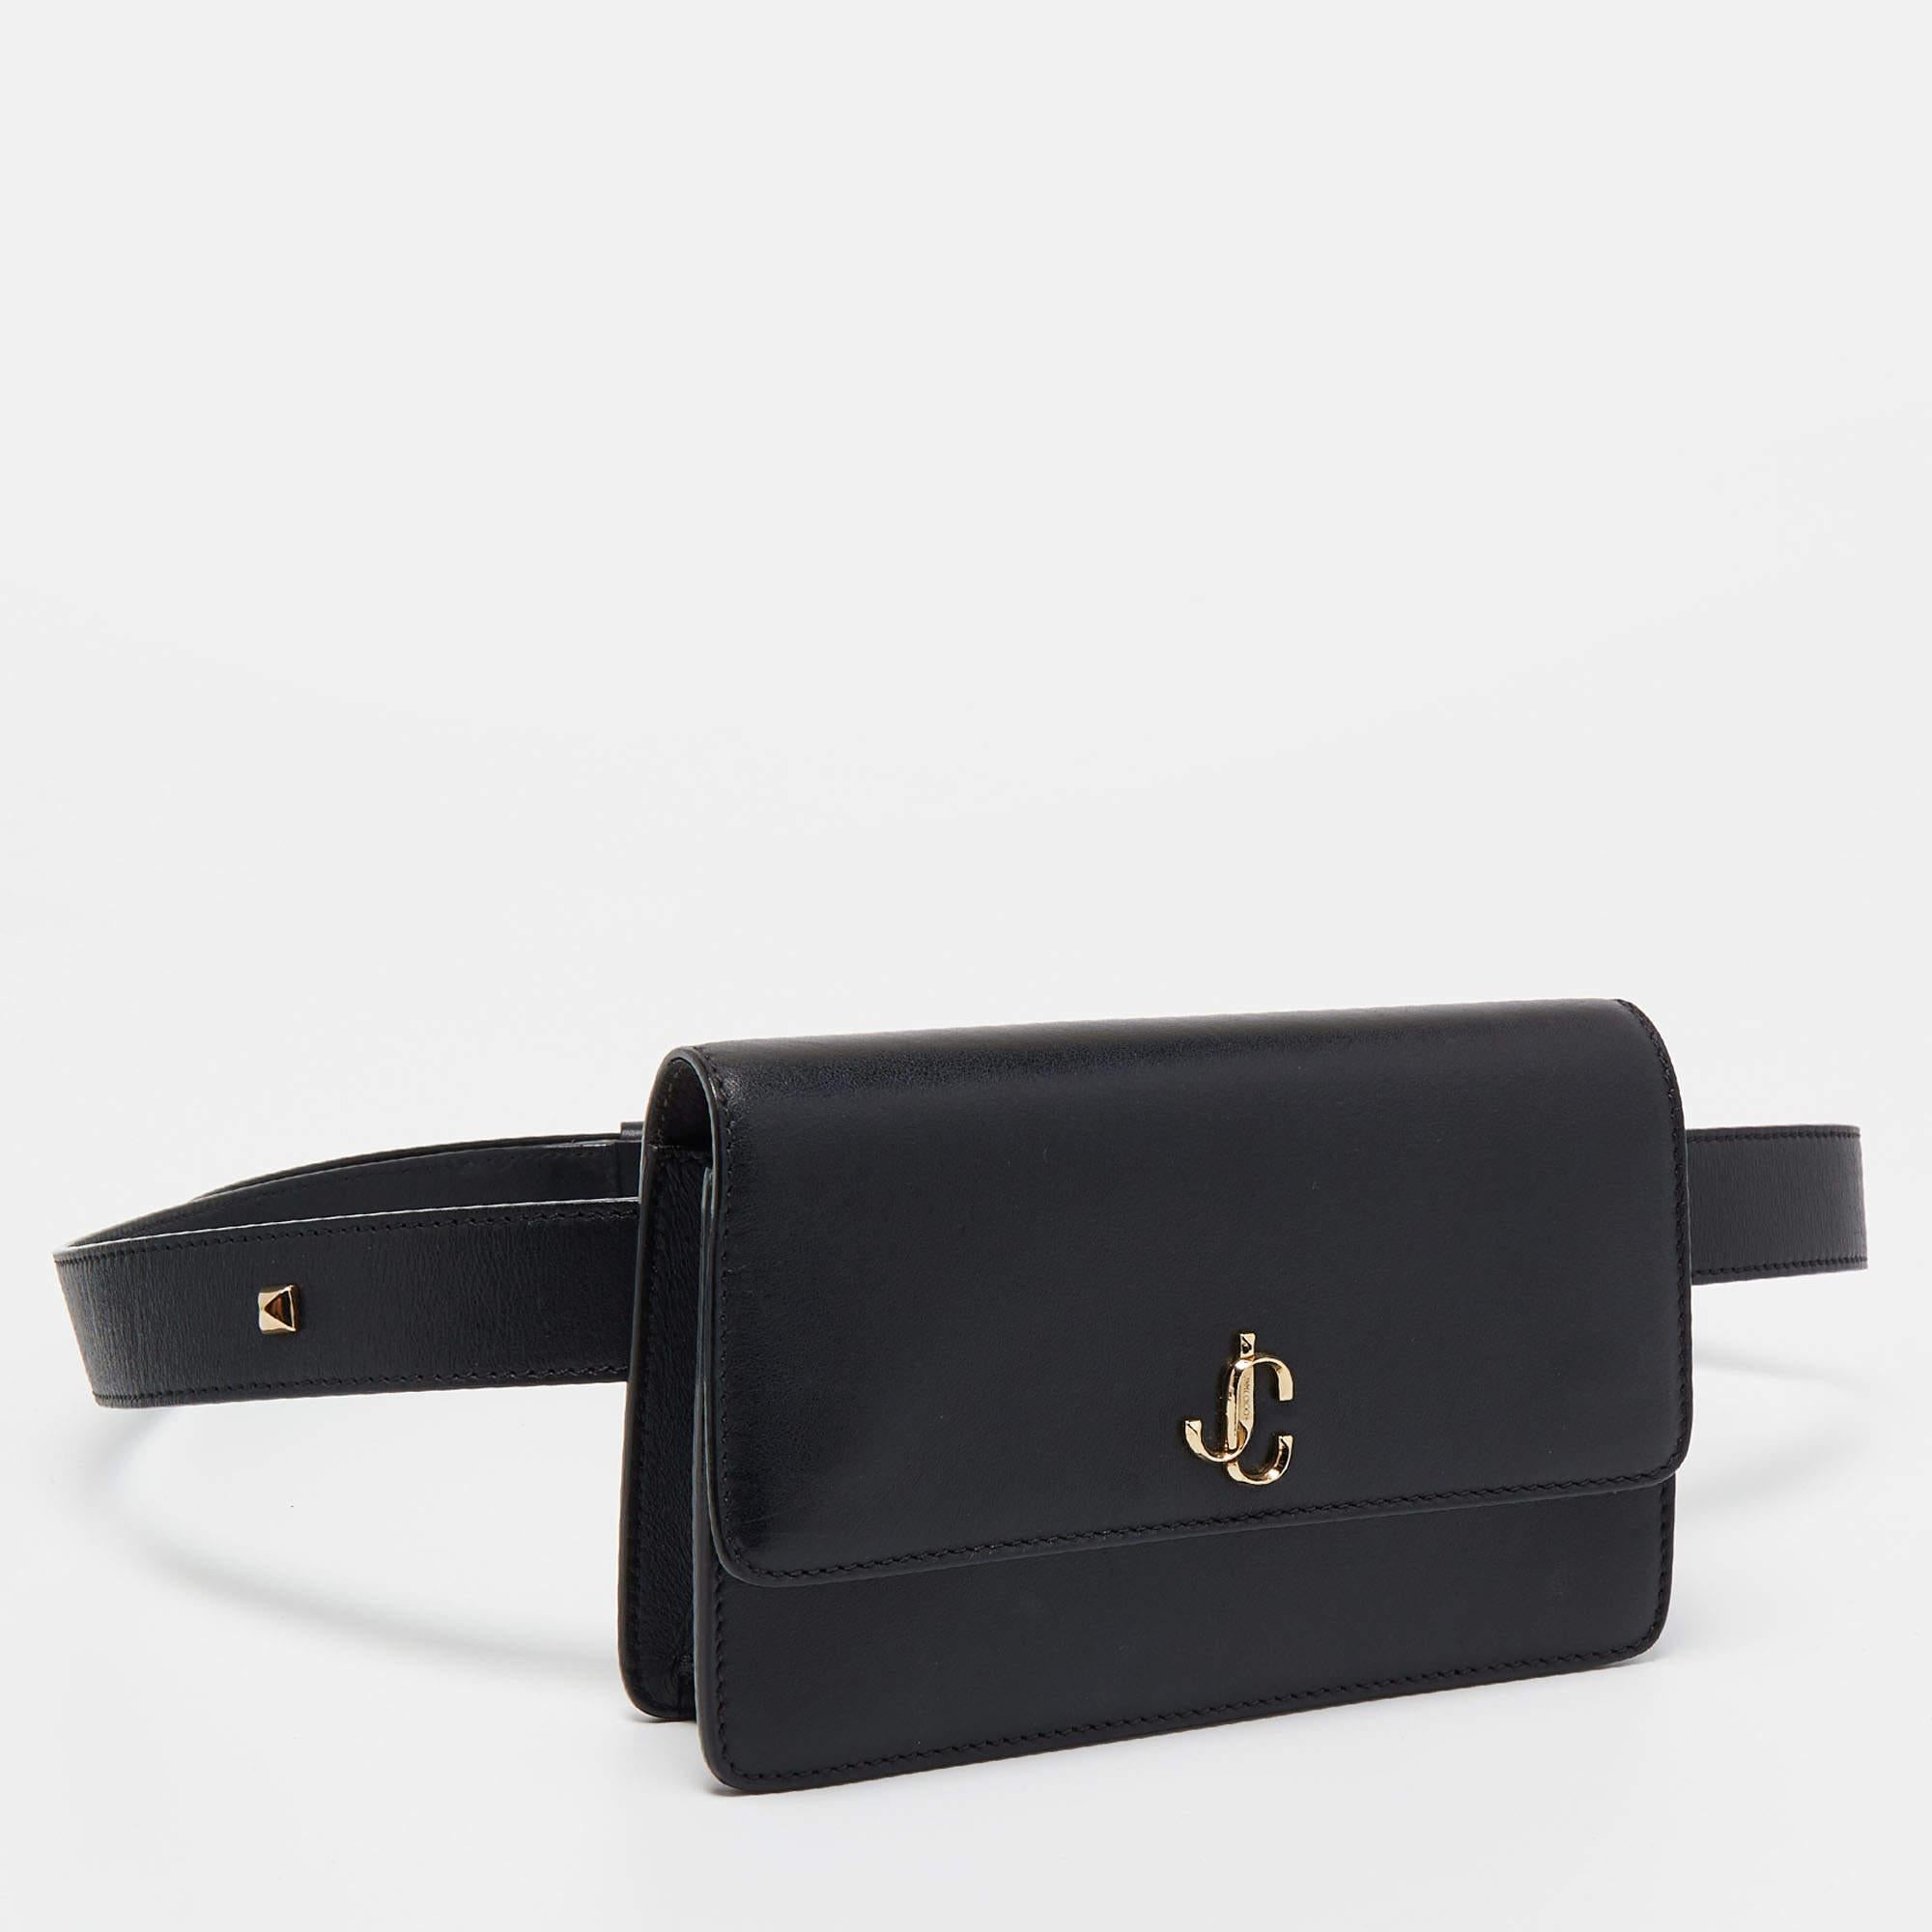 This belt bag from Jimmy Choo is an elegant creation with its simple yet practical design. It is crafted from leather and flaunts a black shade with gold-tone hardware. It will look super chic worn with jumpsuits and dresses!

